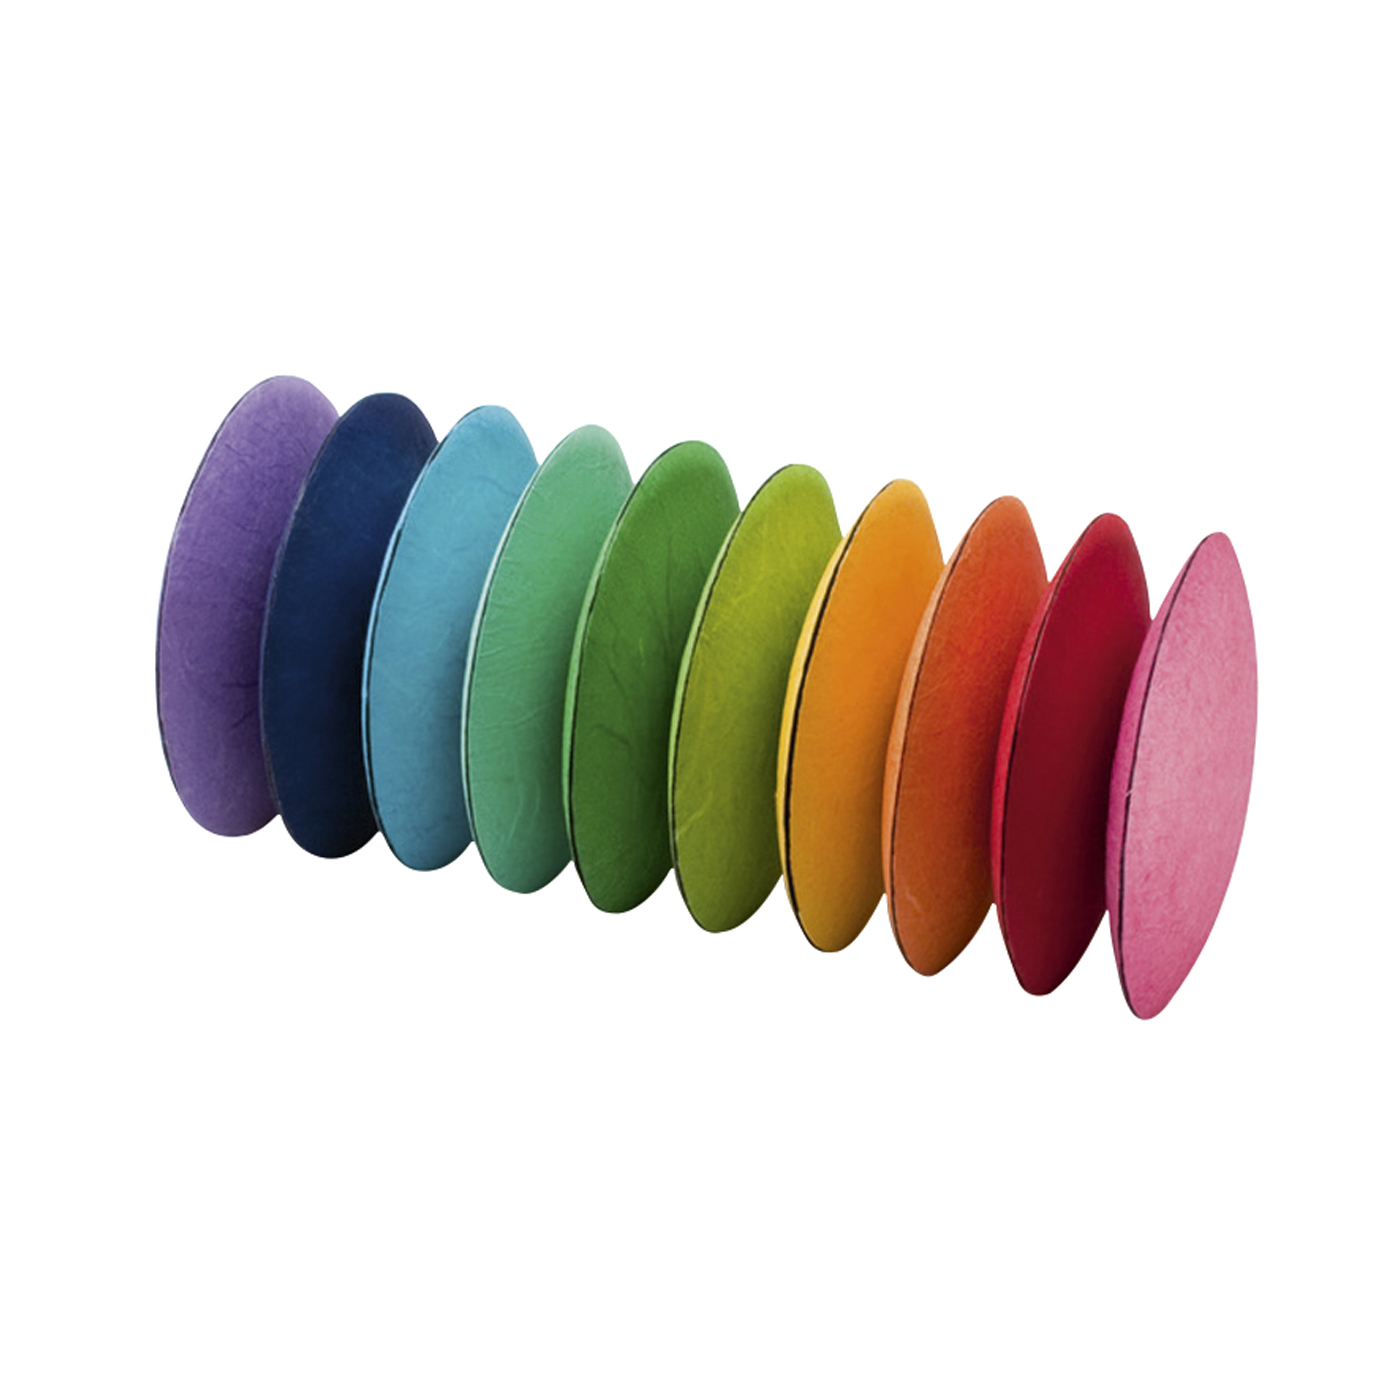 Jewellery Packaging "Smarty", Multicoloured, ø 100 mm - 10 pieces